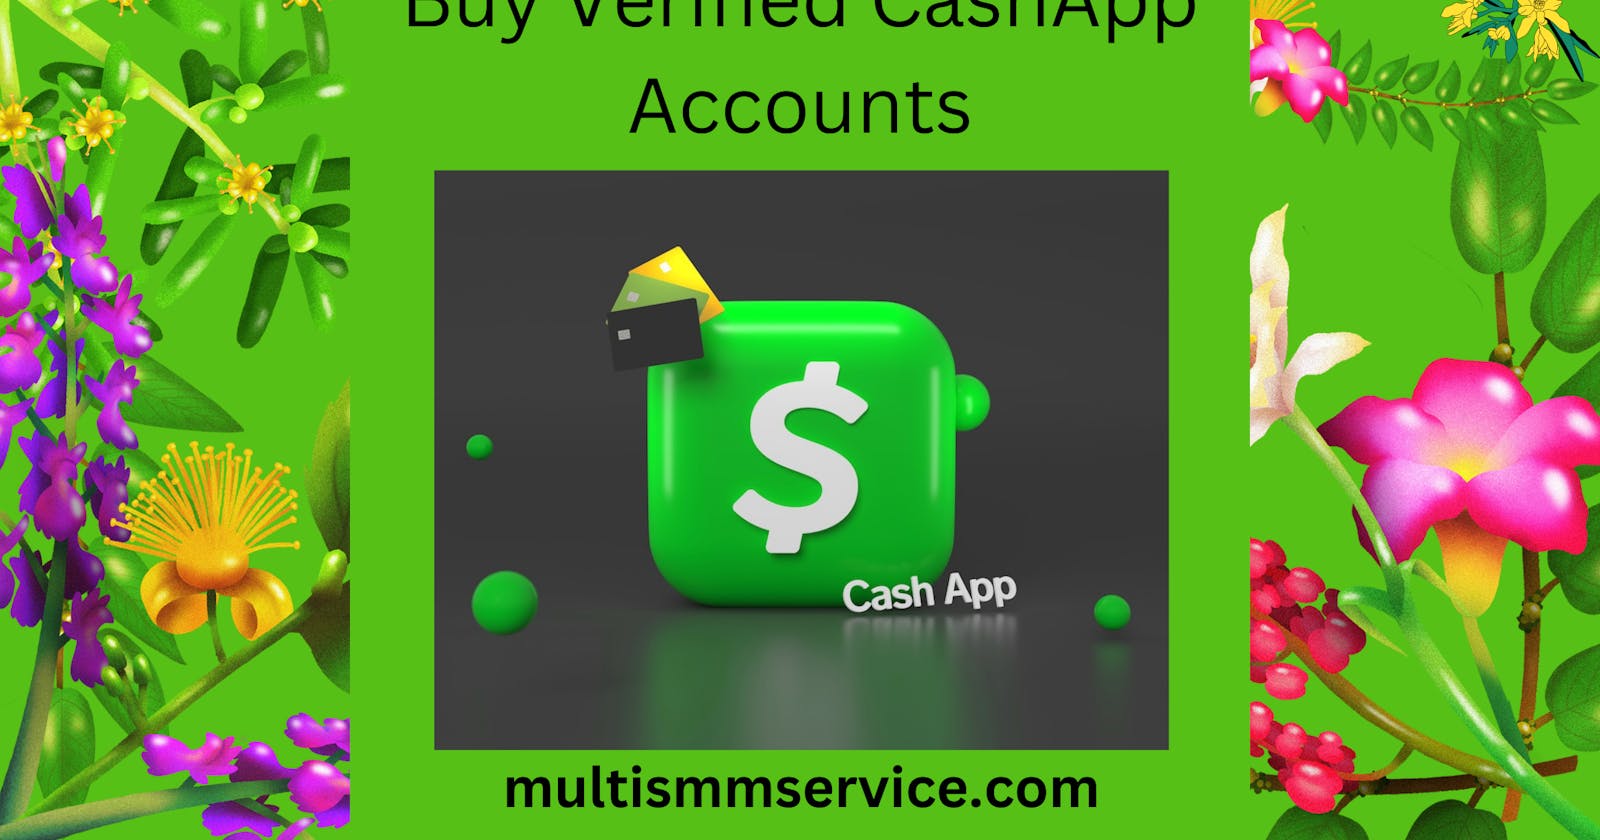 The Importance Of Buying A Verified Cashapp Account